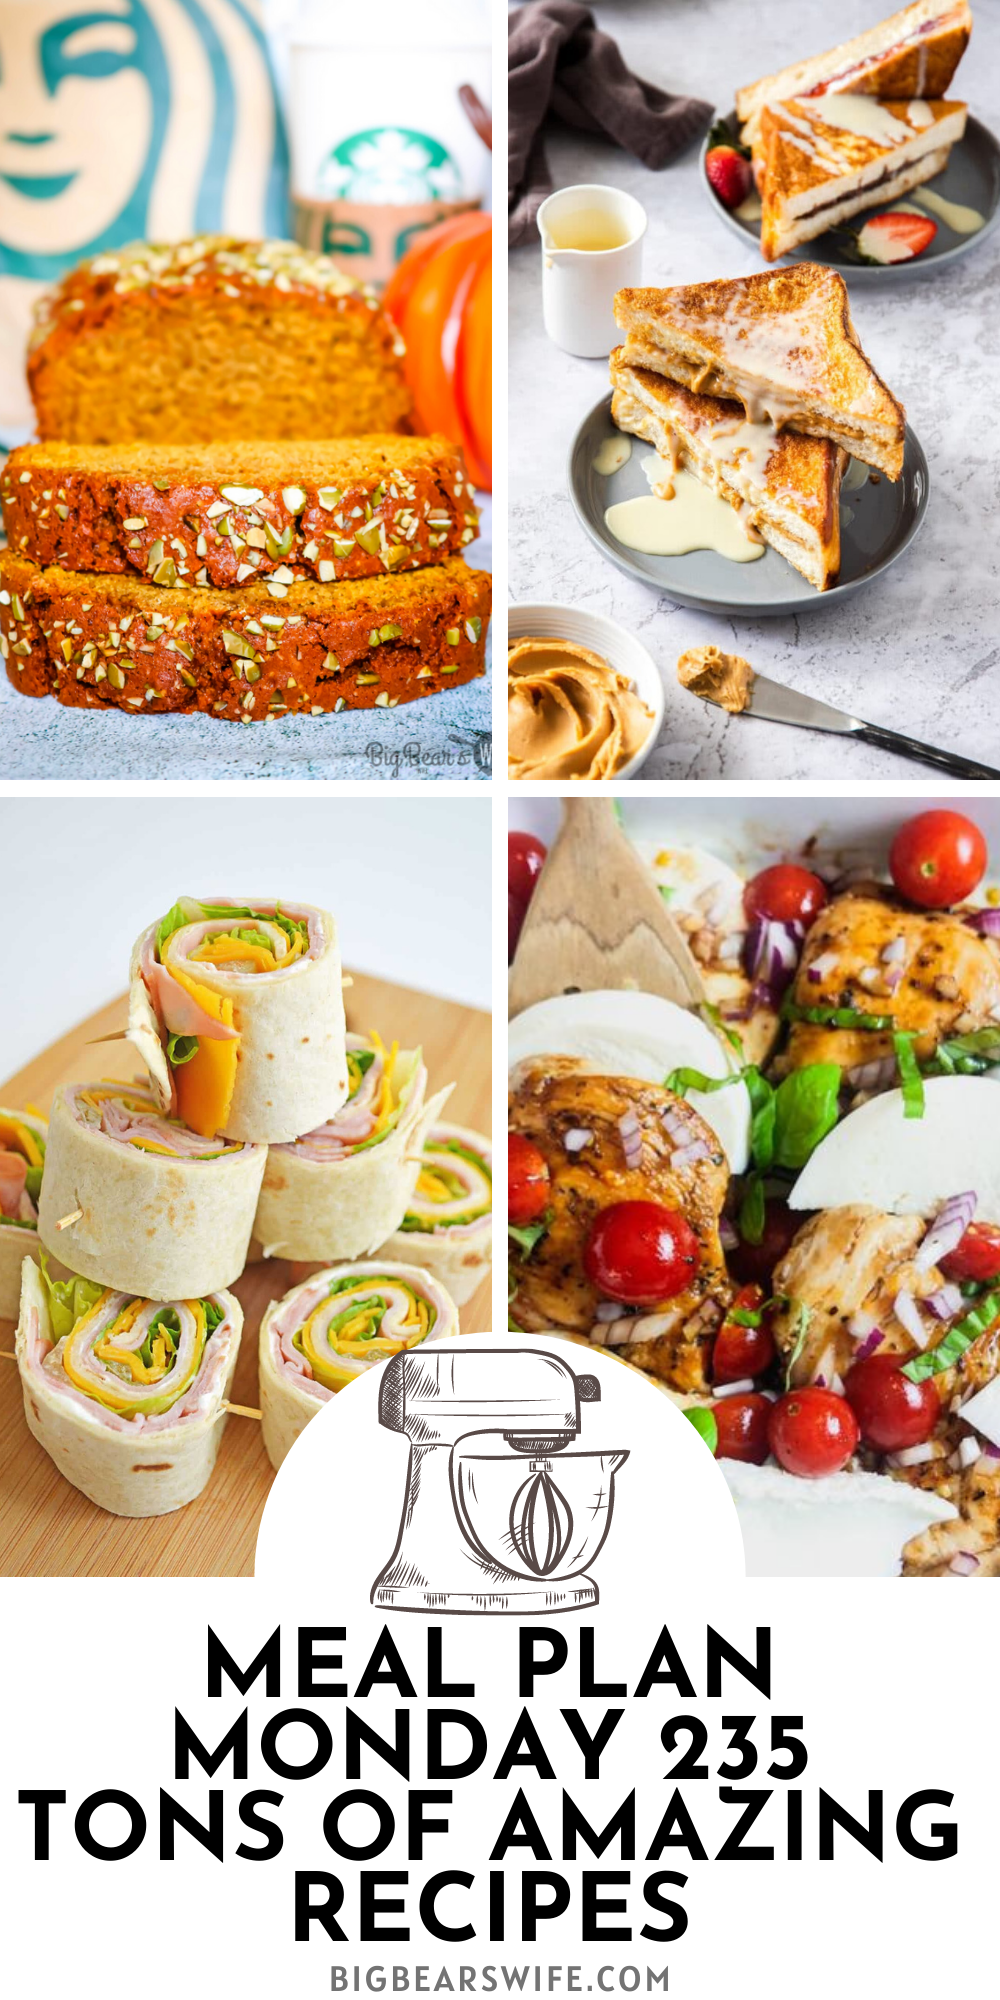 Welcome to Meal Plan Monday 235! This week's featured recipes include, Caprese Chicken with Balsamic Glaze, Hong Kong Style French Toast, Cheese Pinwheels and Copycat Starbucks Pumpkin Bread! Plus tons more recipe from bloggers all over the world!  via @bigbearswife